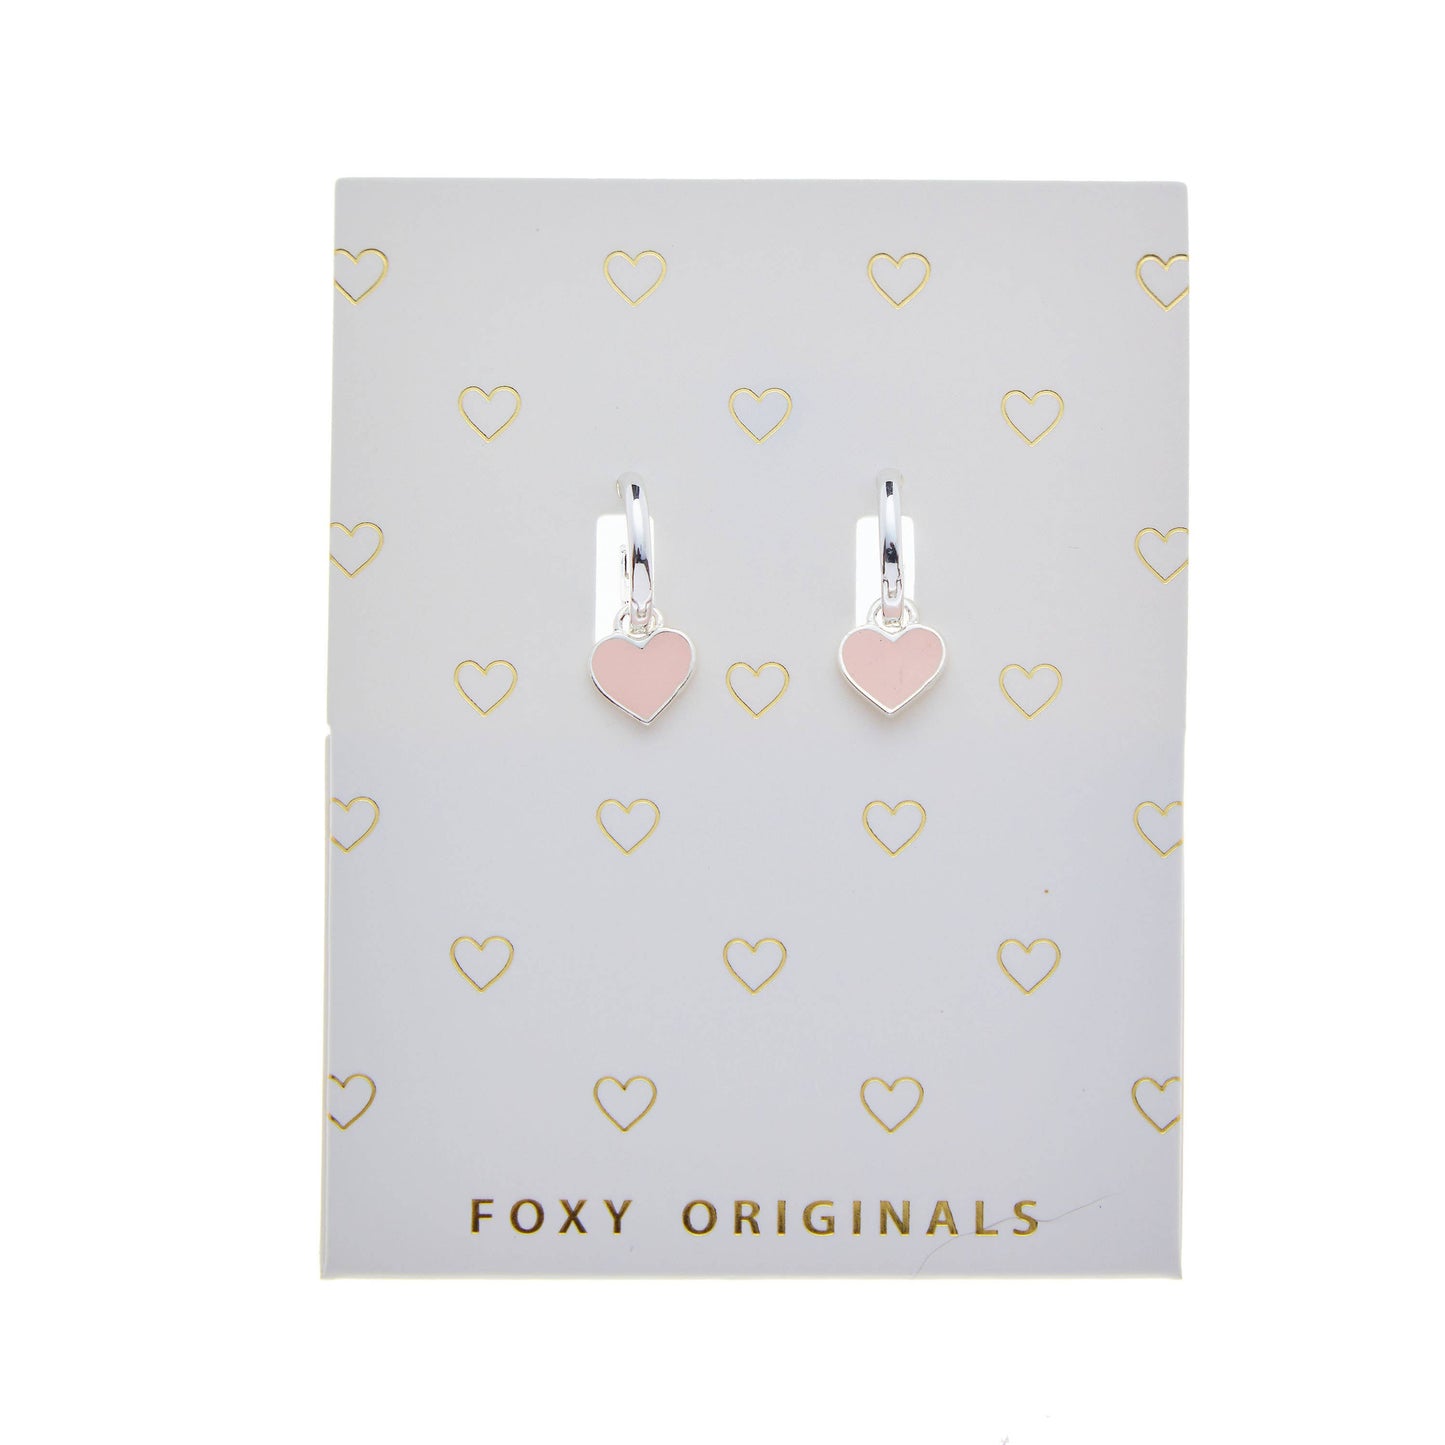 Foxy Originals - Goddess Earrings | NEW for Spring | Huggie Hoops: Yellow Gold